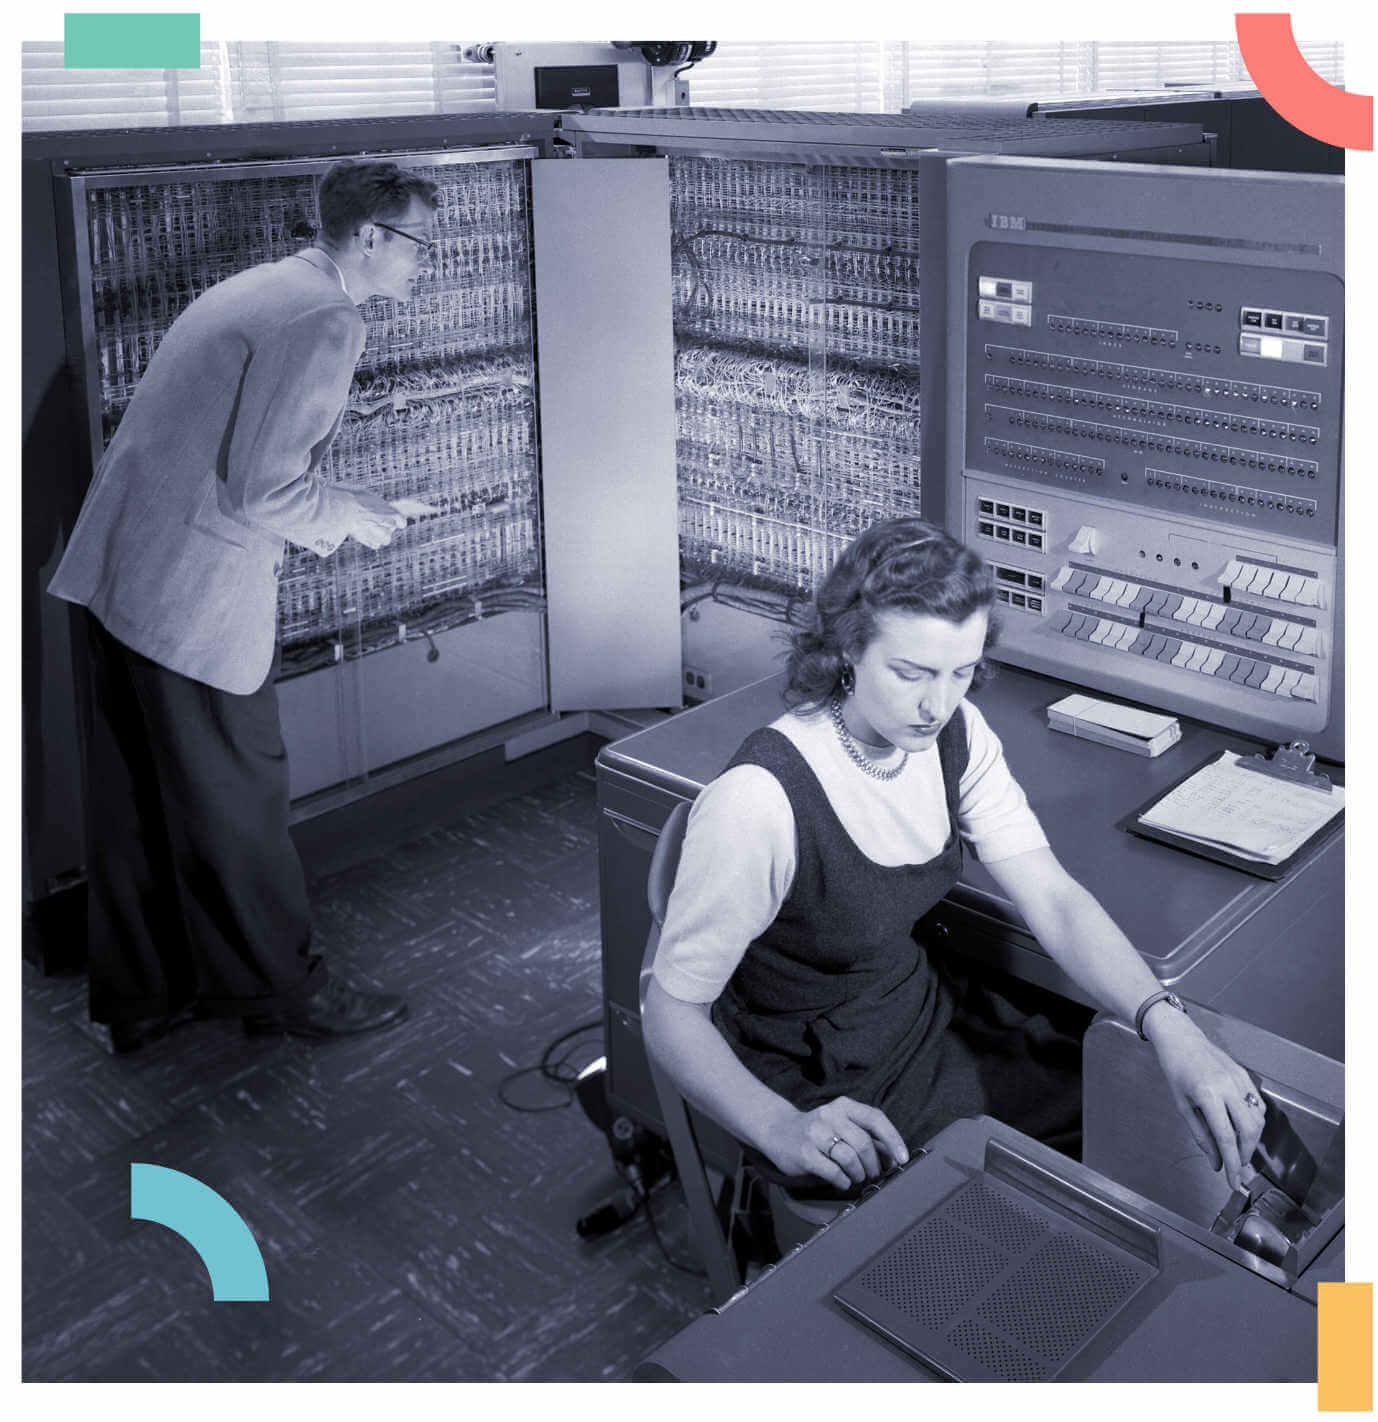 Image of a man and a woman working in a vintage computer lab